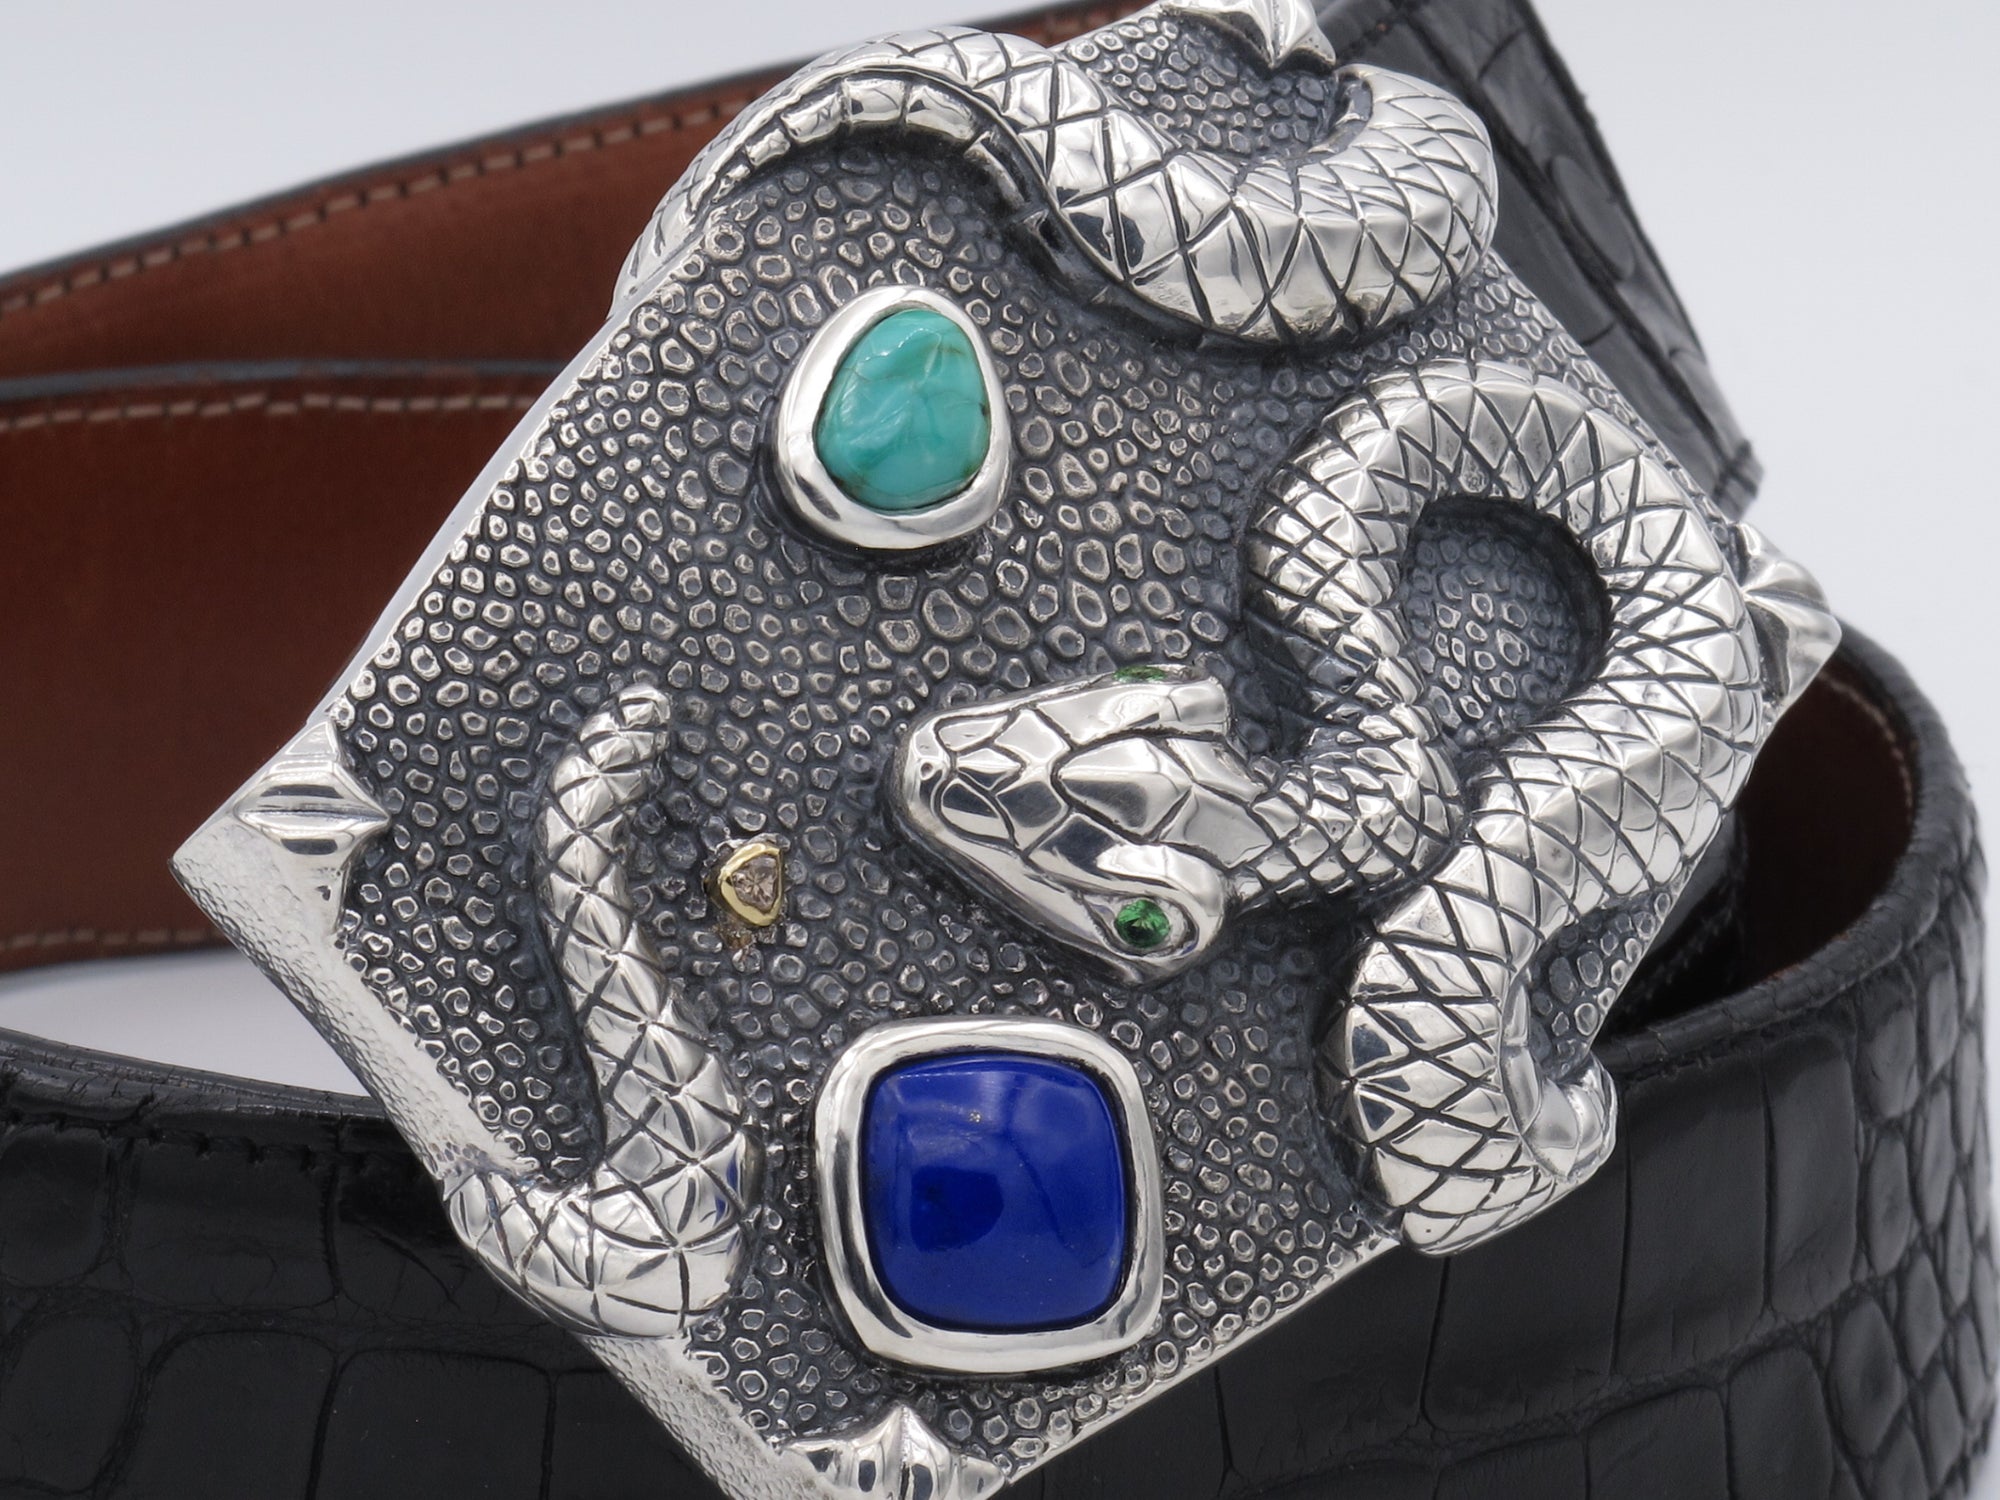 image of the Angular shaped trophy depicting a Snke drapped on it. This custom version is made with tsavorite eyes and  bezel set Lapis,Turqoise cabochons and Rough Brown Diamond [set in 18kt bezel]